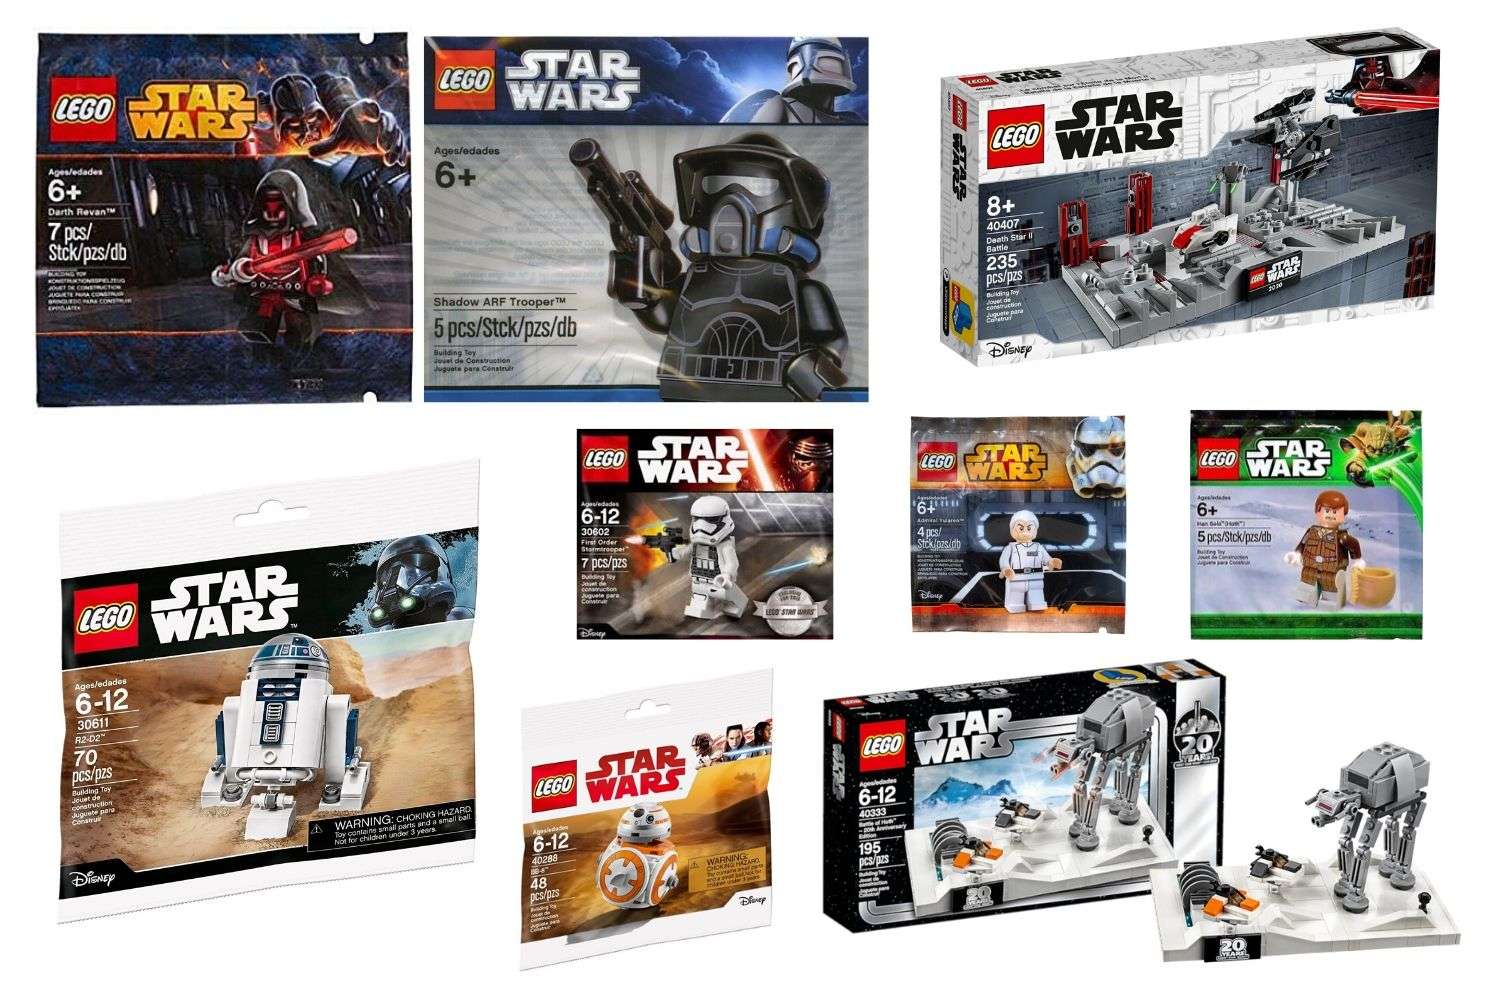 LEGO Star Wars May the Fourth promotions